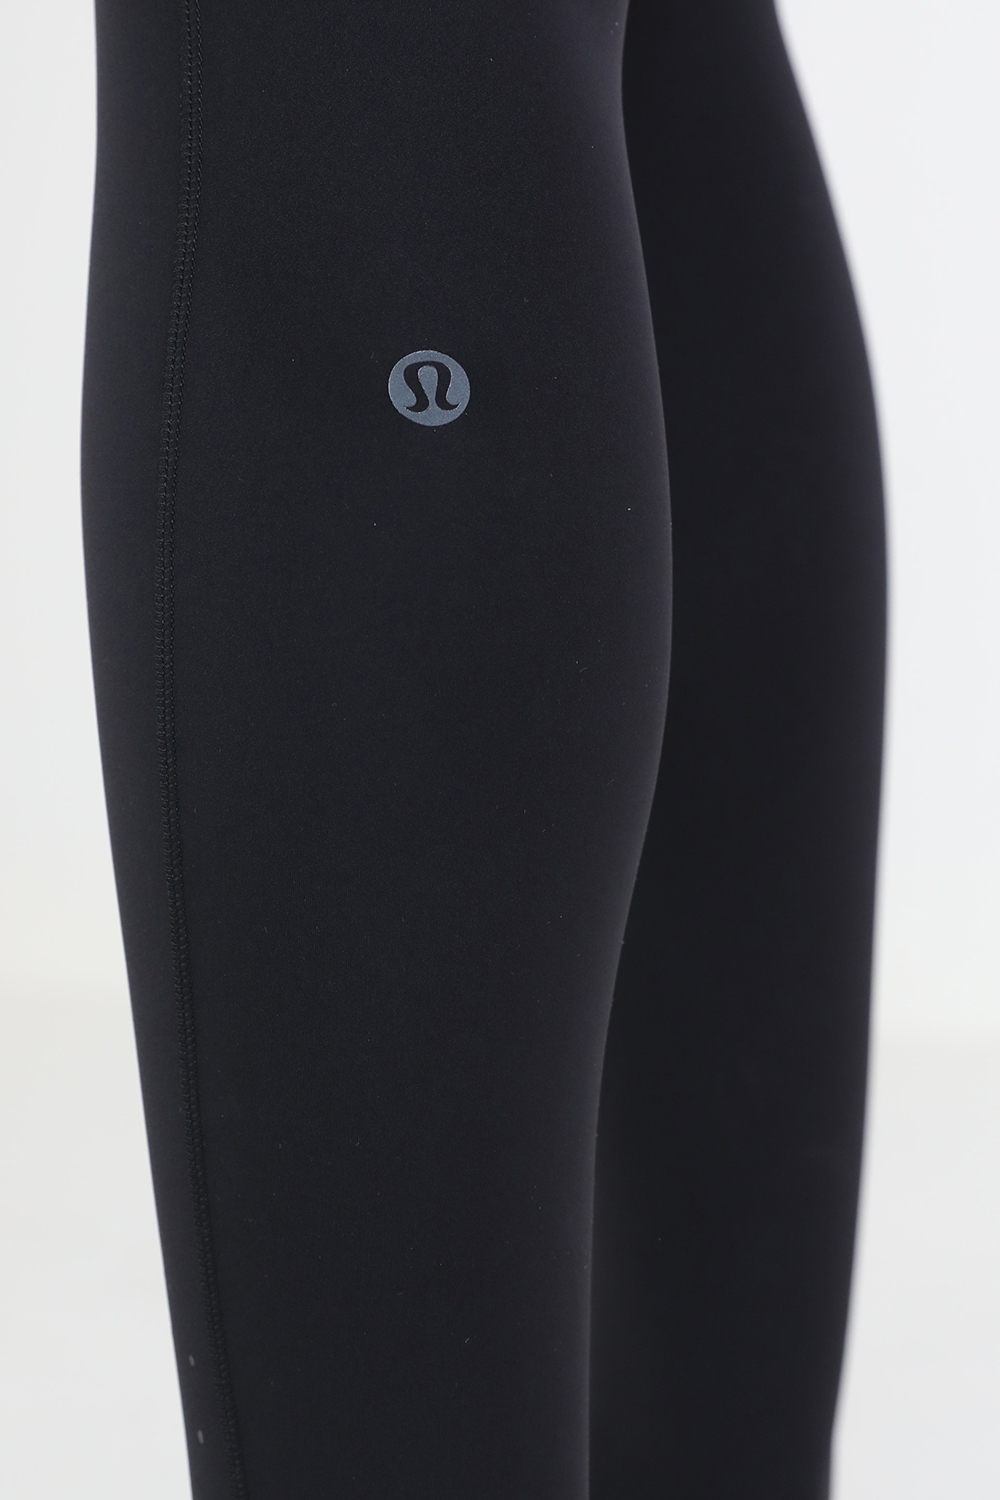 Fast and Free HR Tight 28” LULULEMON